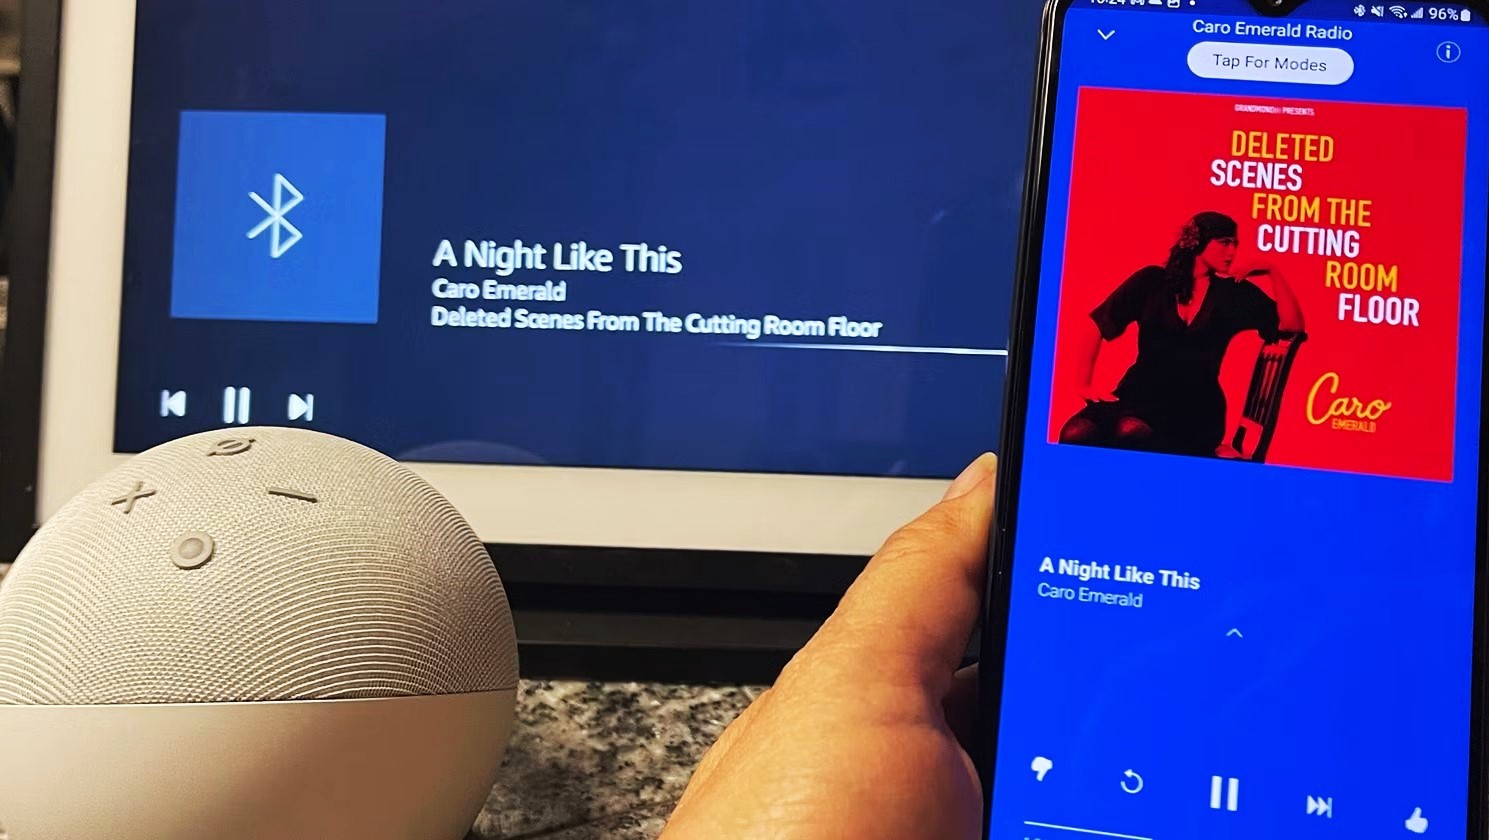 How To Play Music On Your Phone Through Amazon Echo